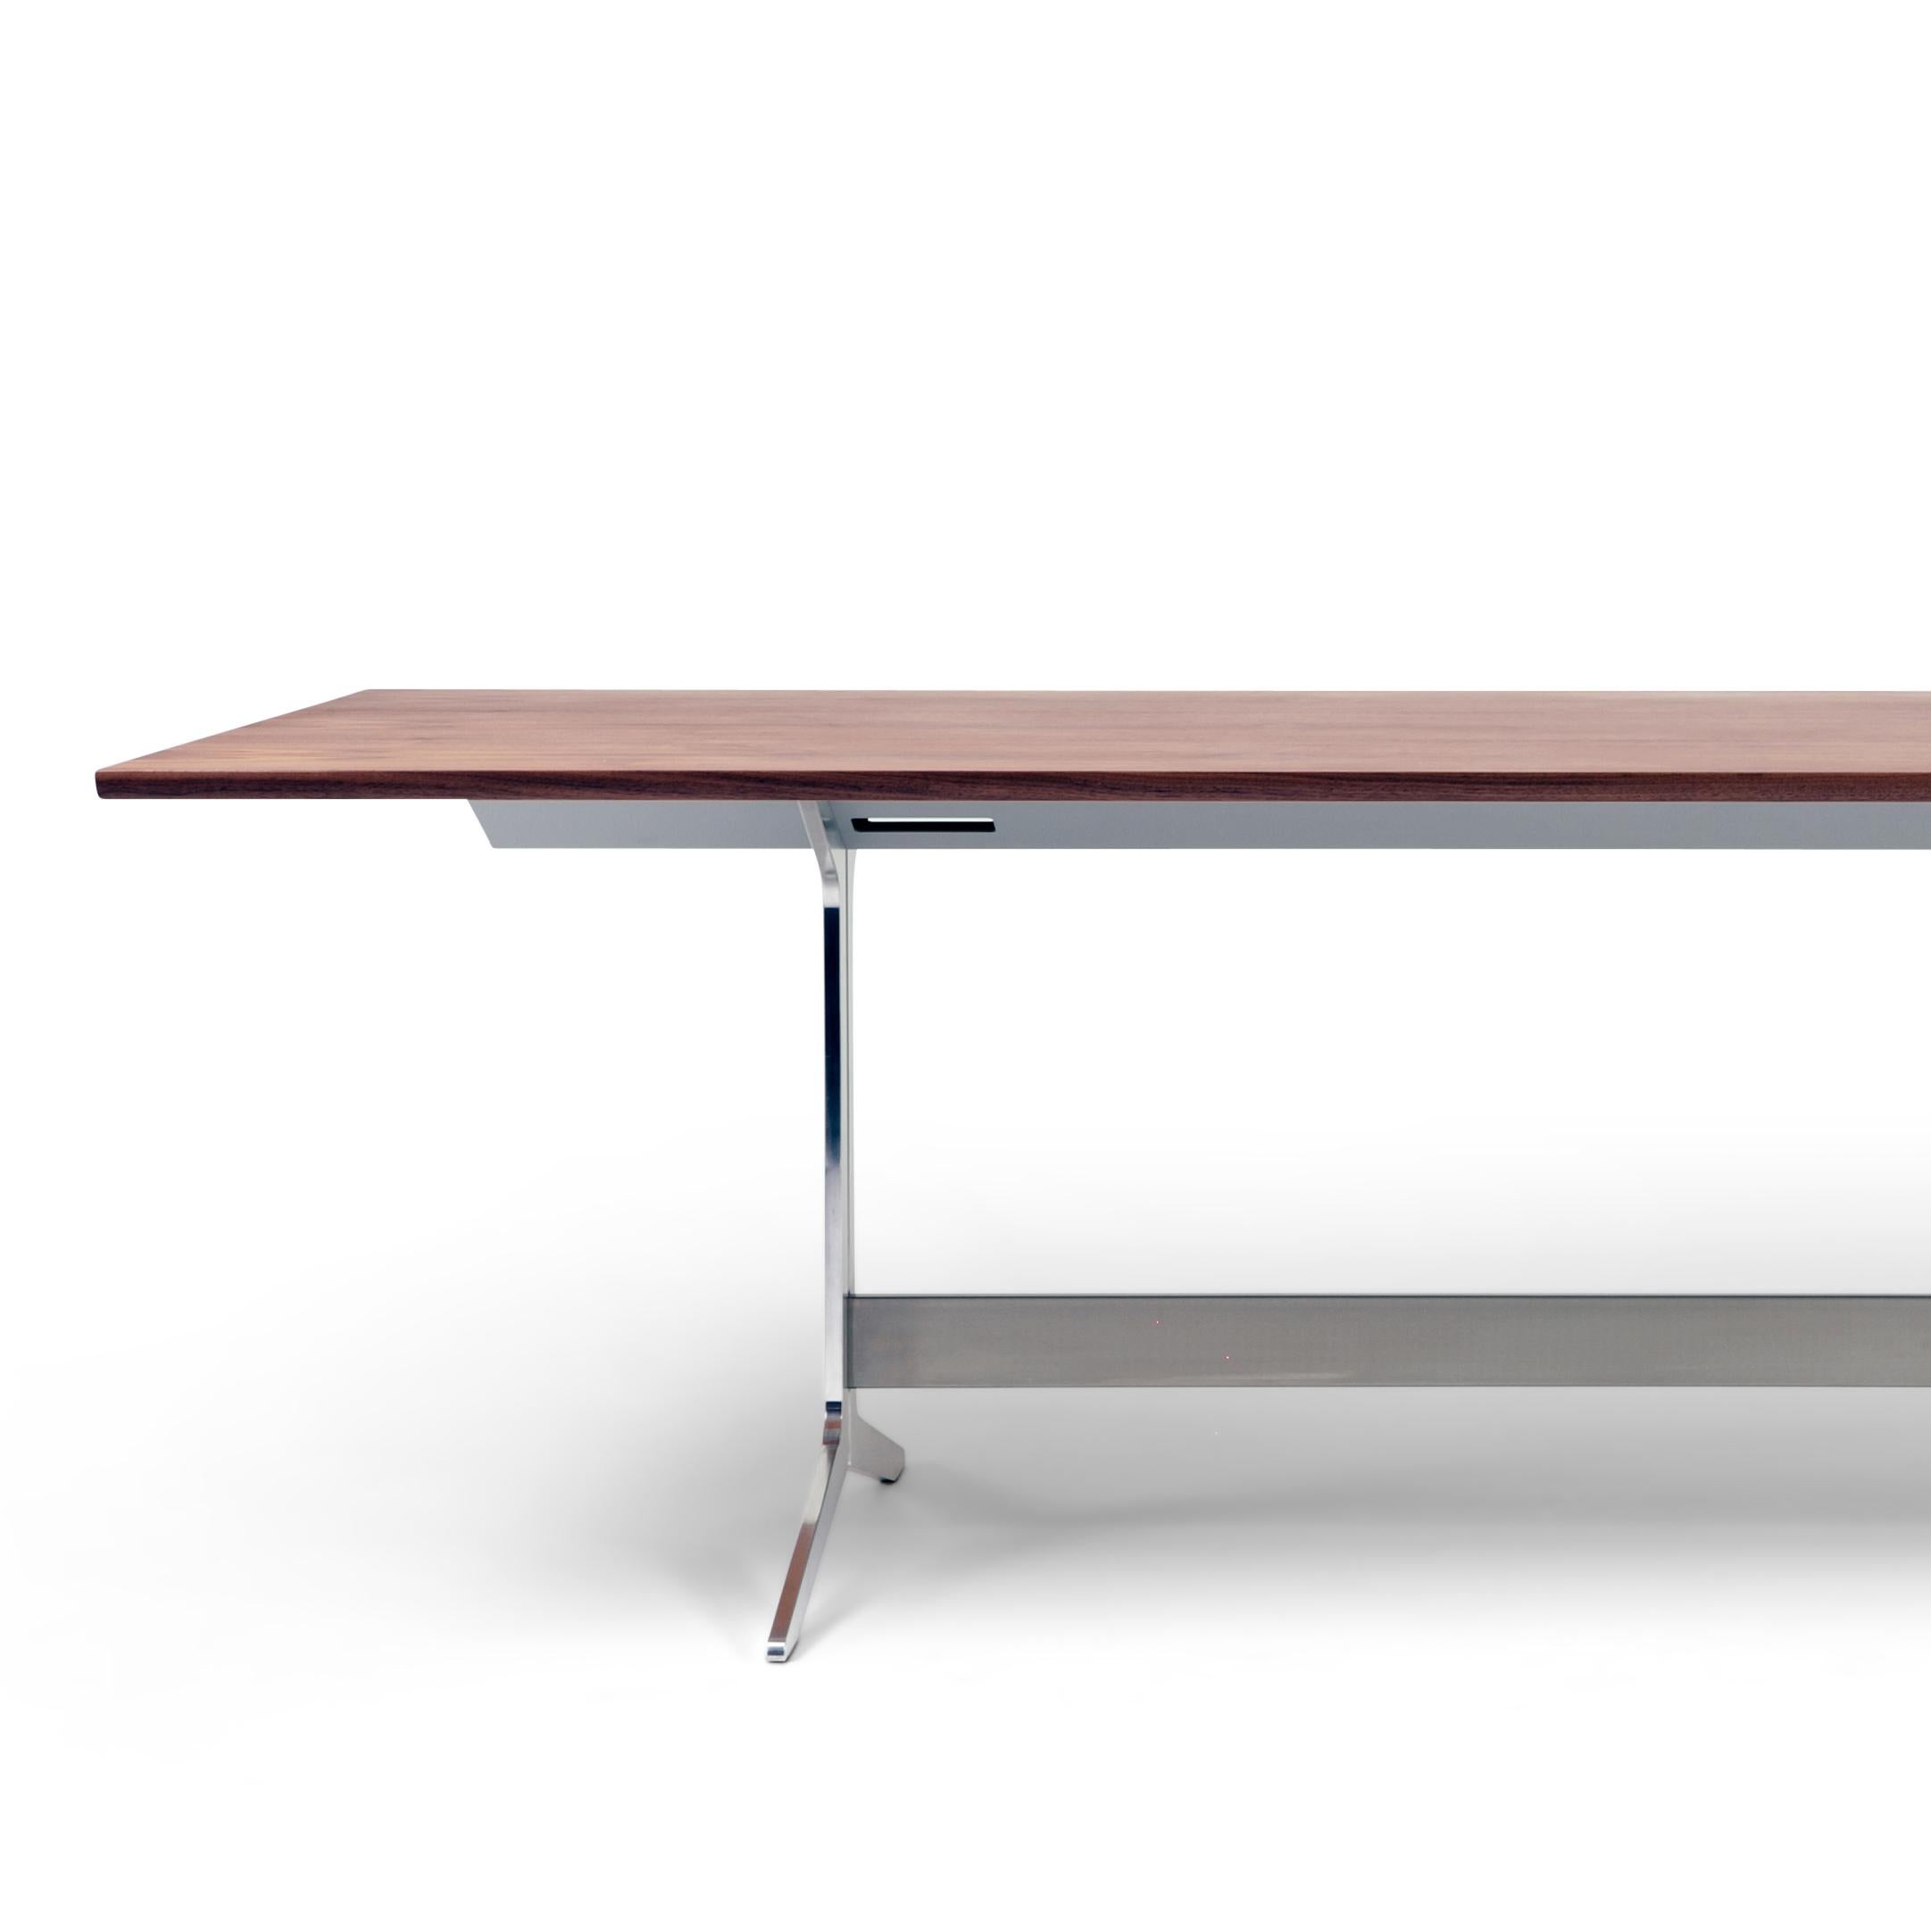 The design duo Salto and Sigsgaard had their winning bid from the Trusteeship Council Chamber in mind when they designed an exclusive series of conference tables. The tables are designed to suit the council chair and the series is perfect for